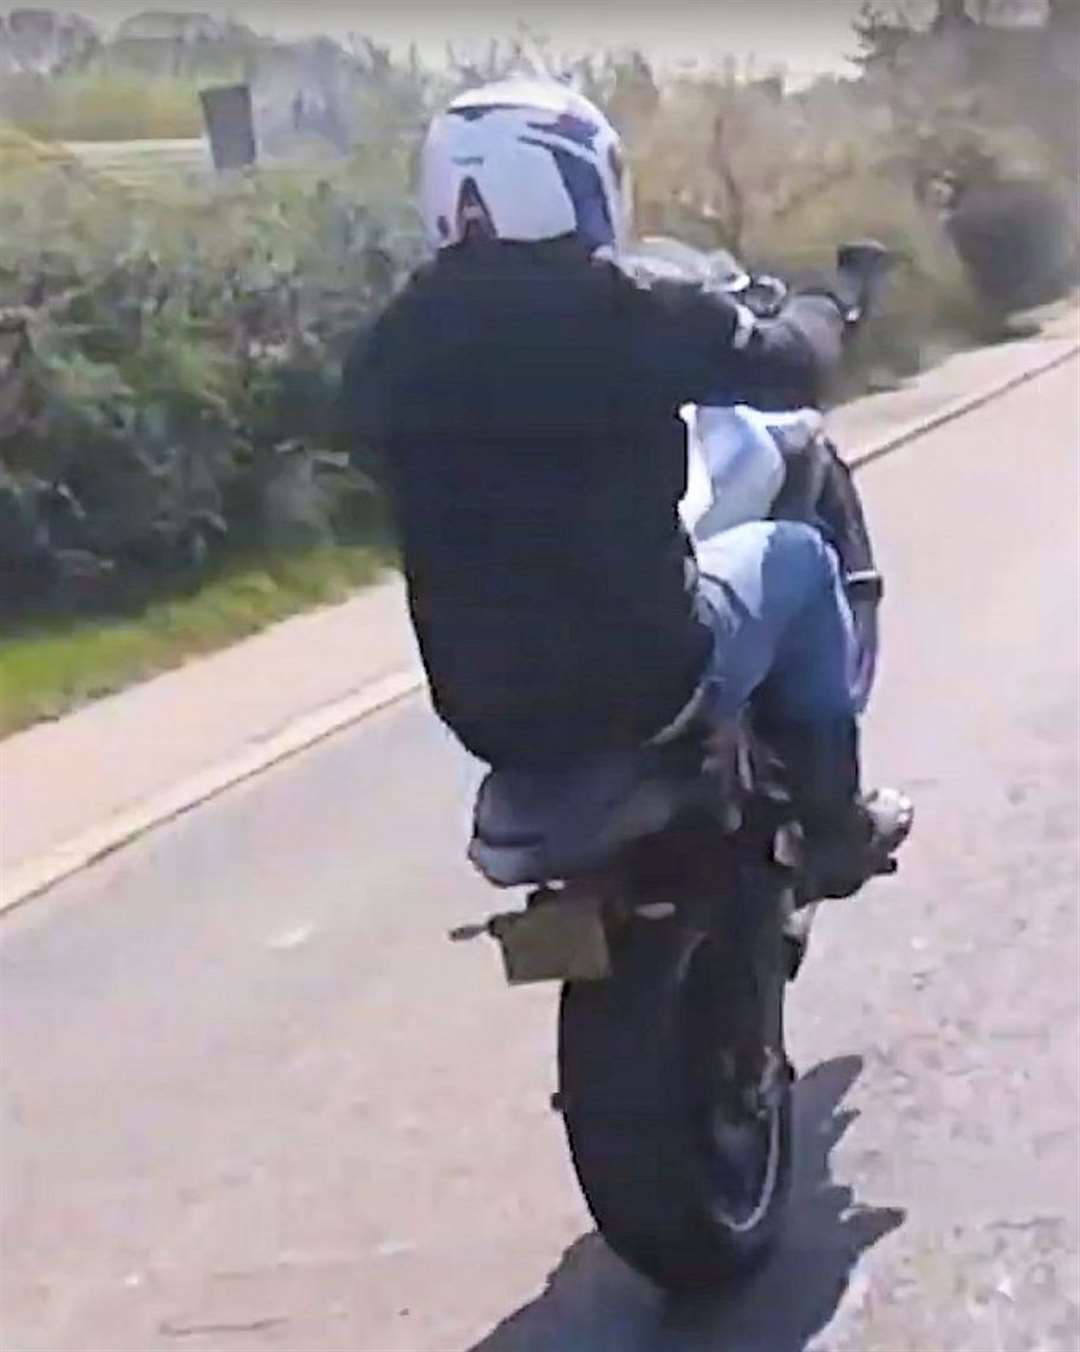 Two of the bikers were jailed for their dangerous driving